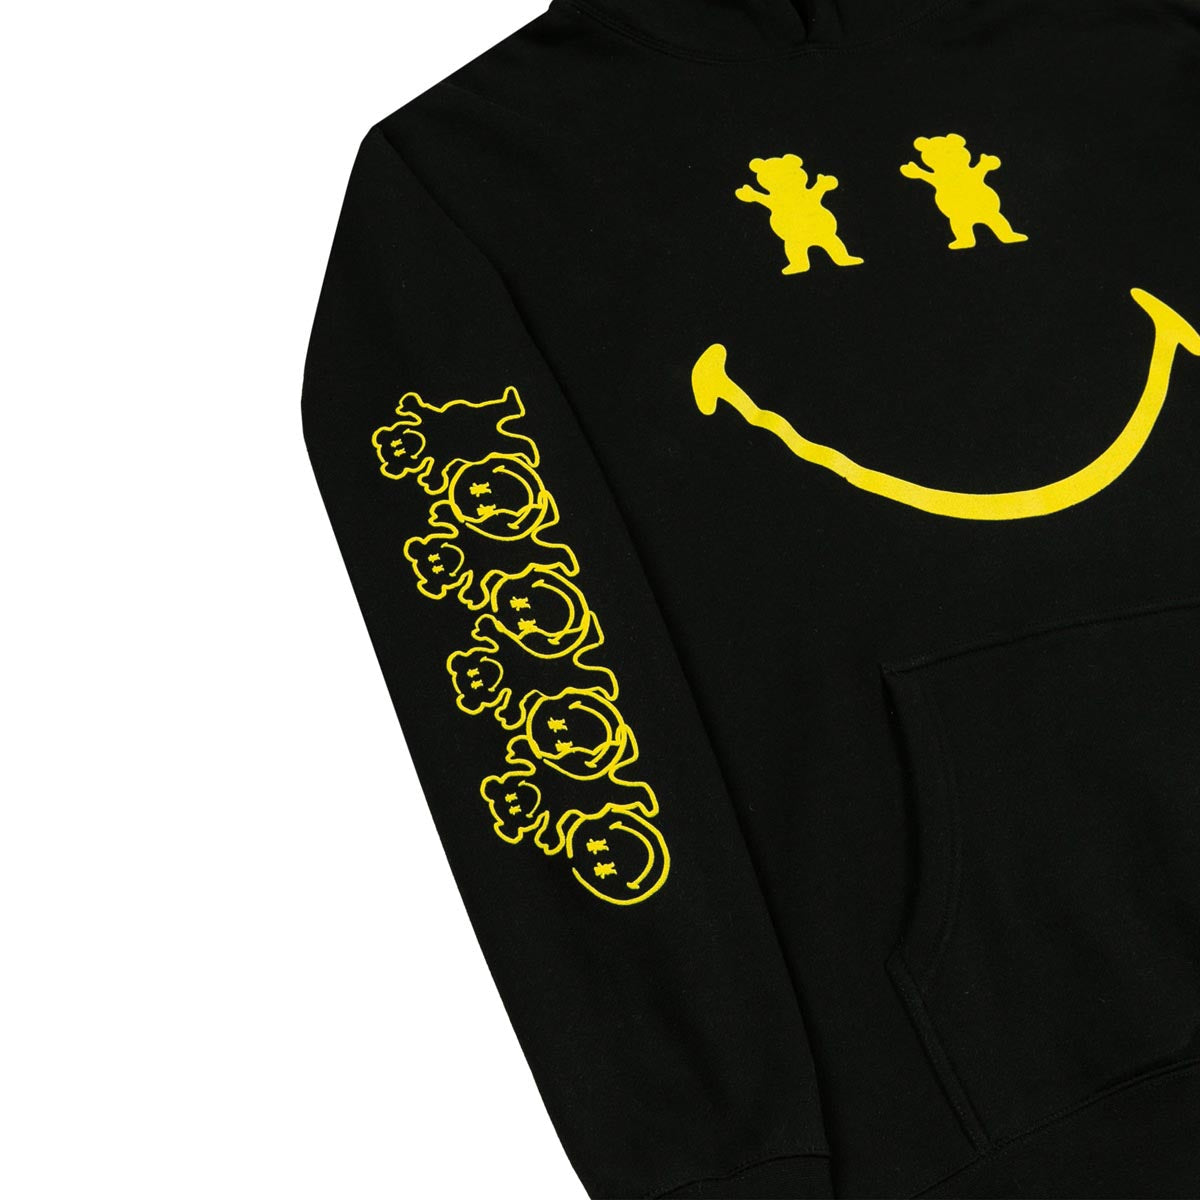 Grizzly x Smiley World Big Smile Hoodie - Black image 2